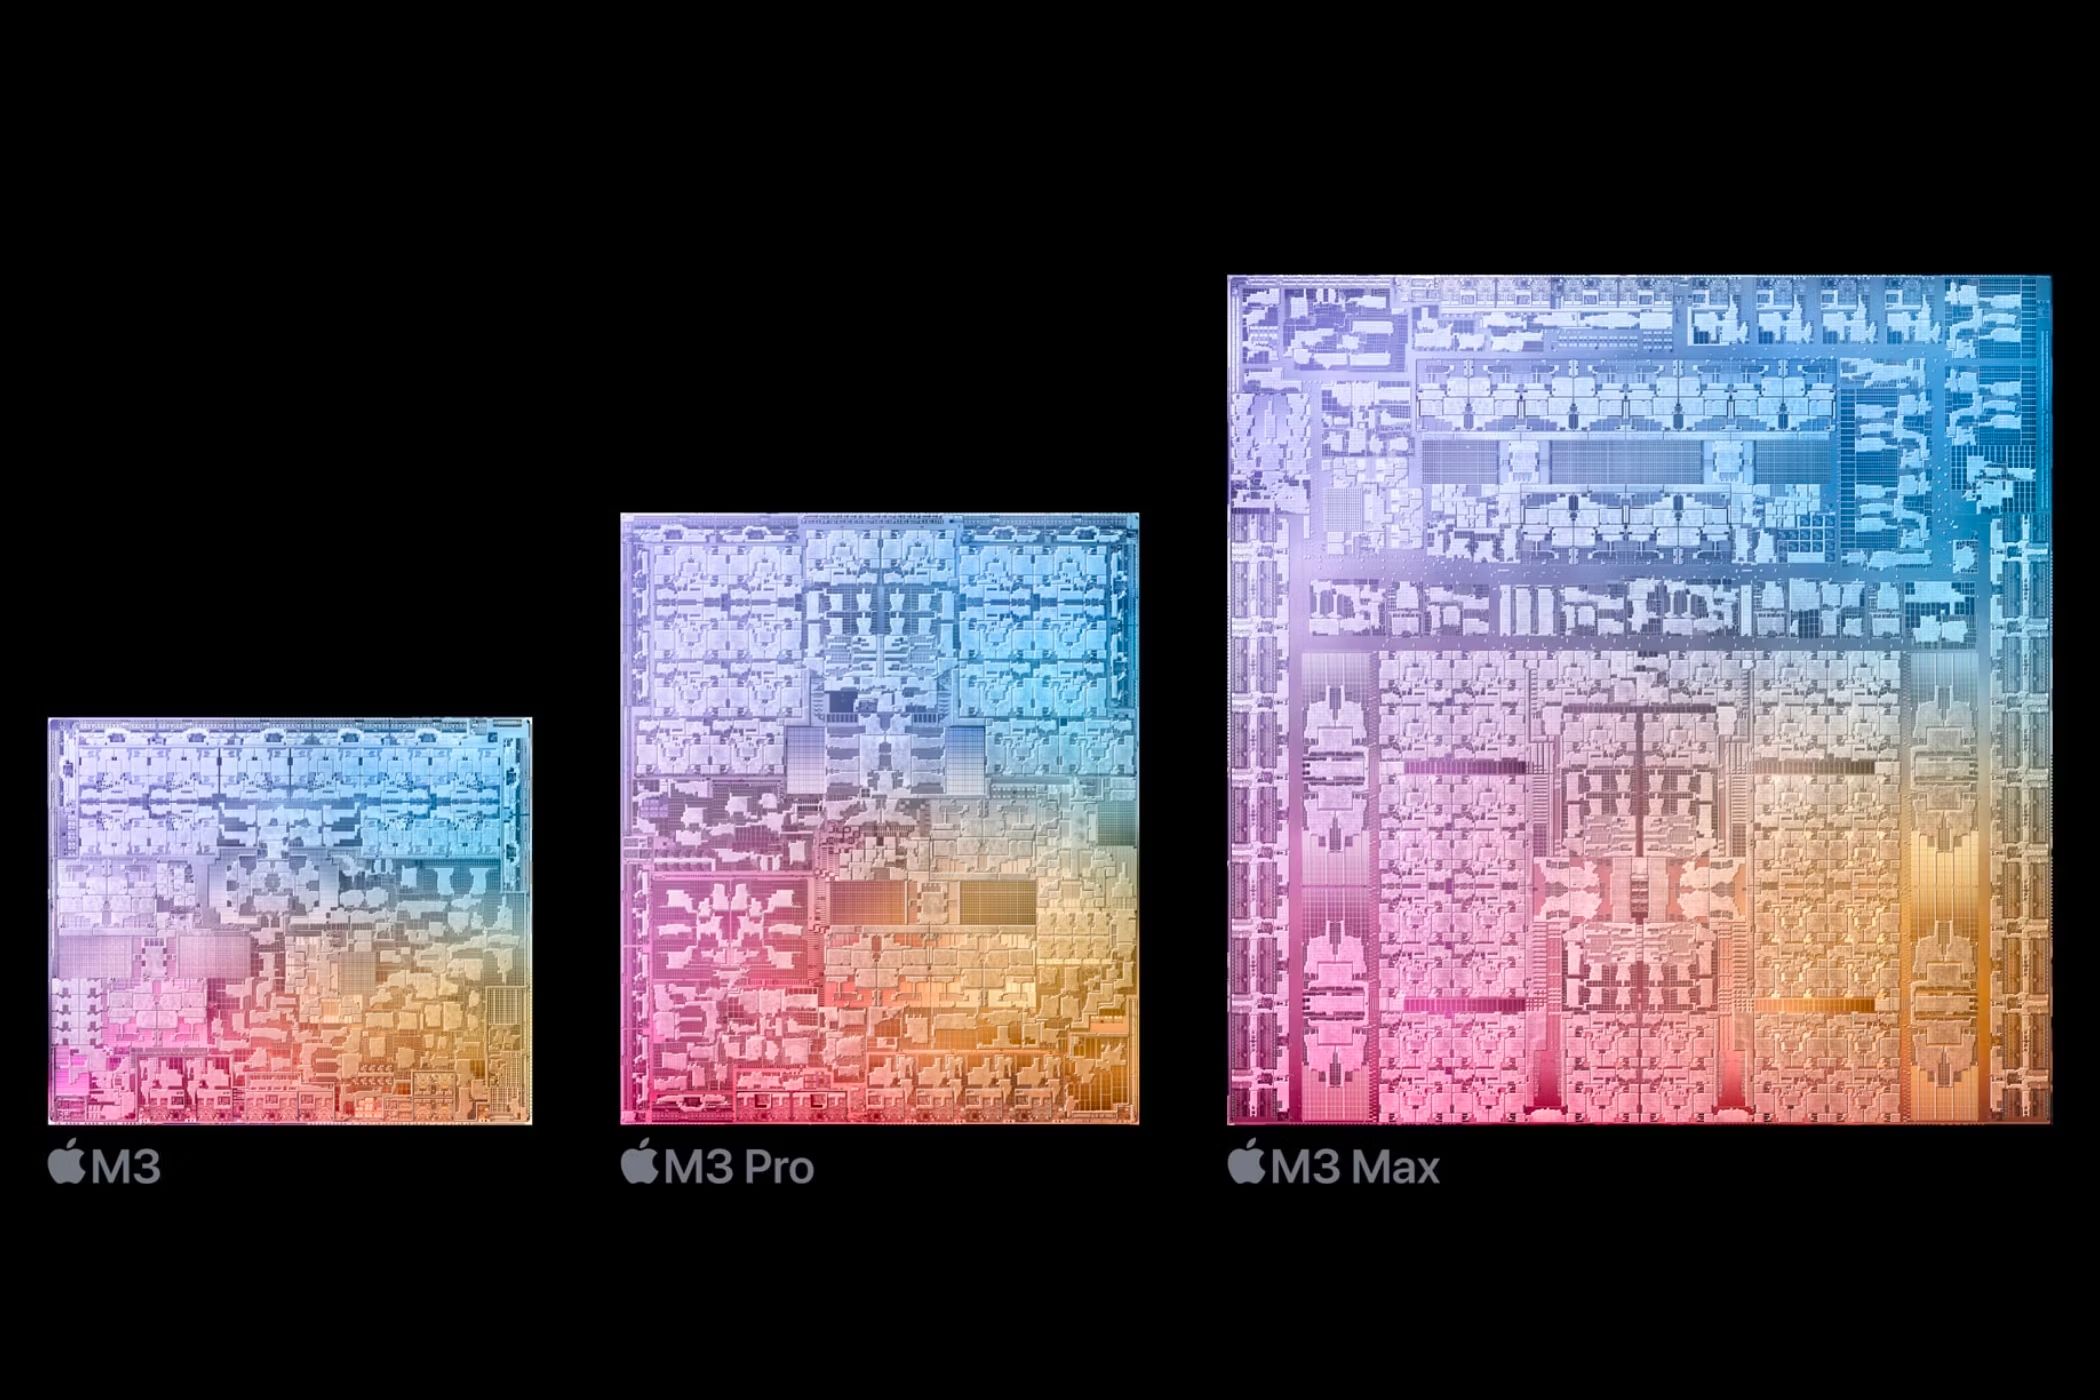 Creative visualization of the M3, M3 Pro, and the M3 Max chipsets by Apple